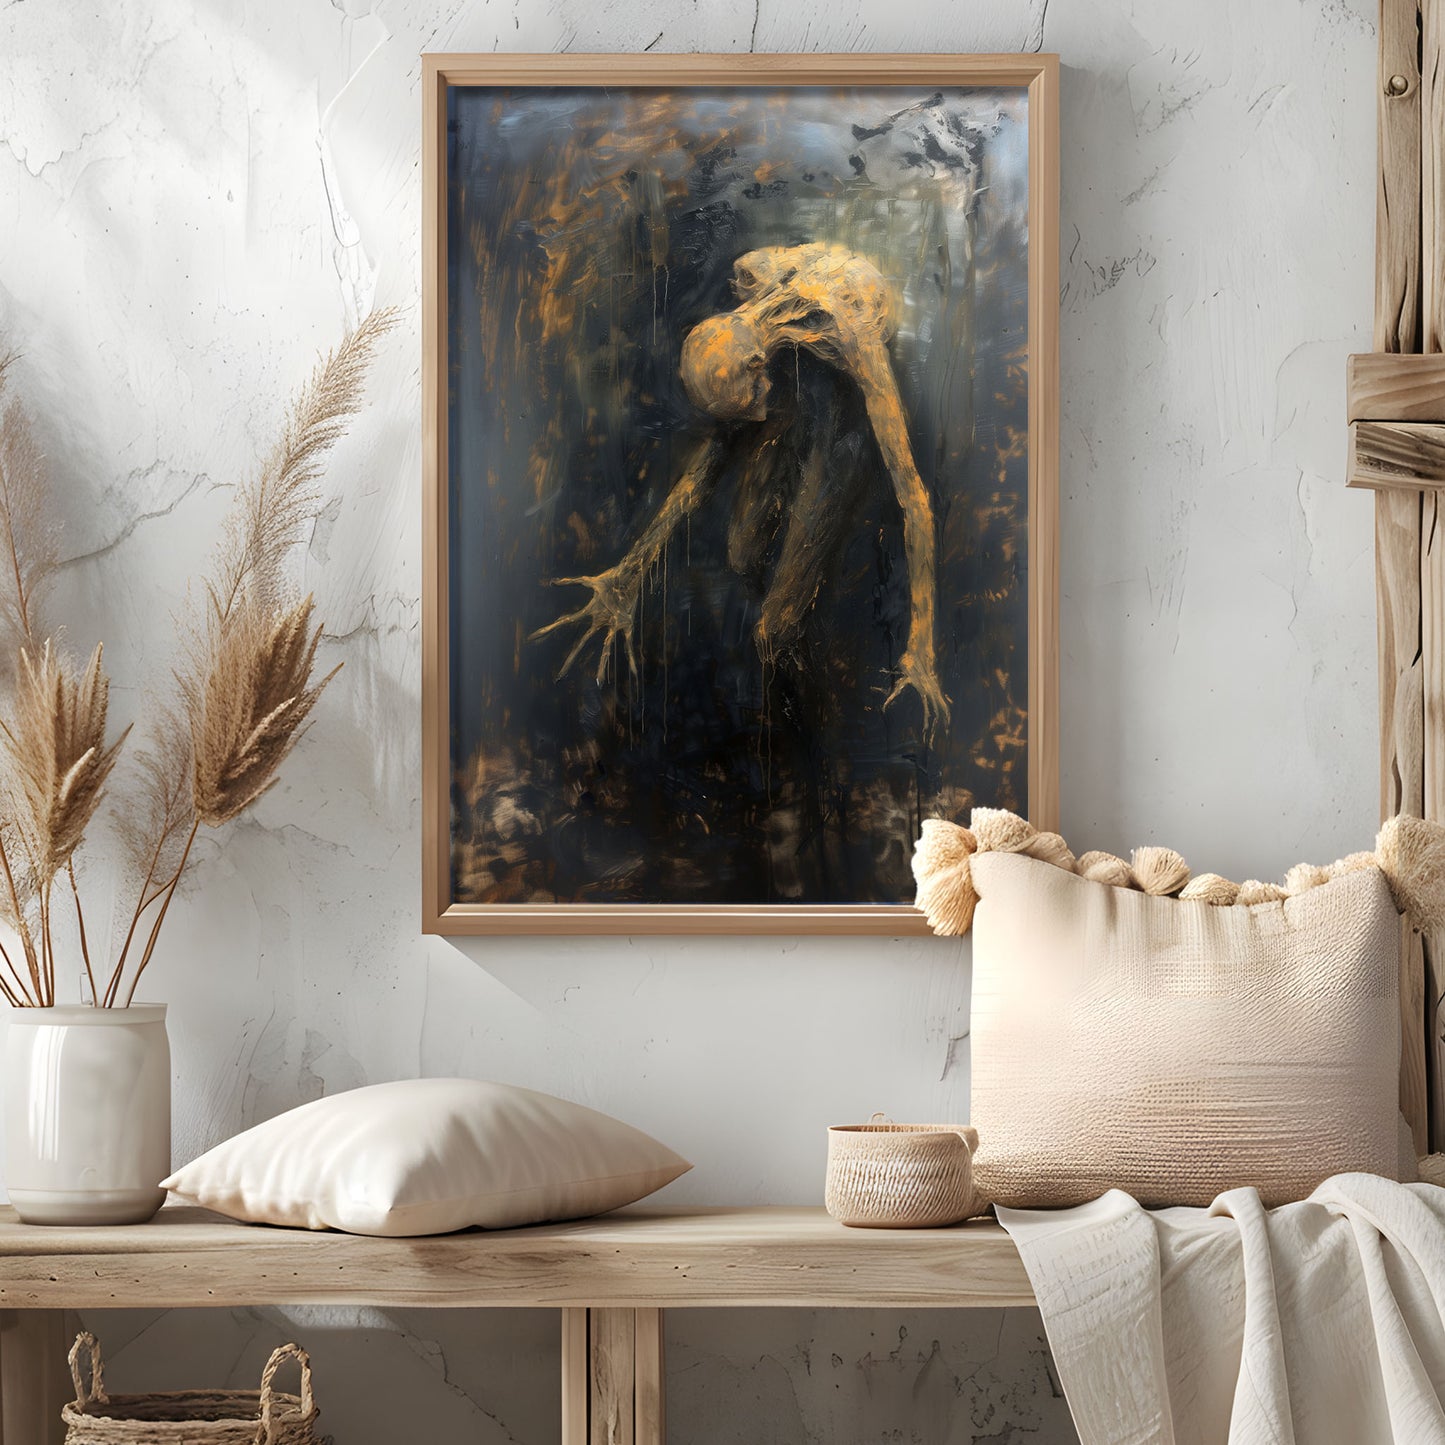 Gritty Scary Oil Painting of Bent Over Creature - Gothic Poster Print